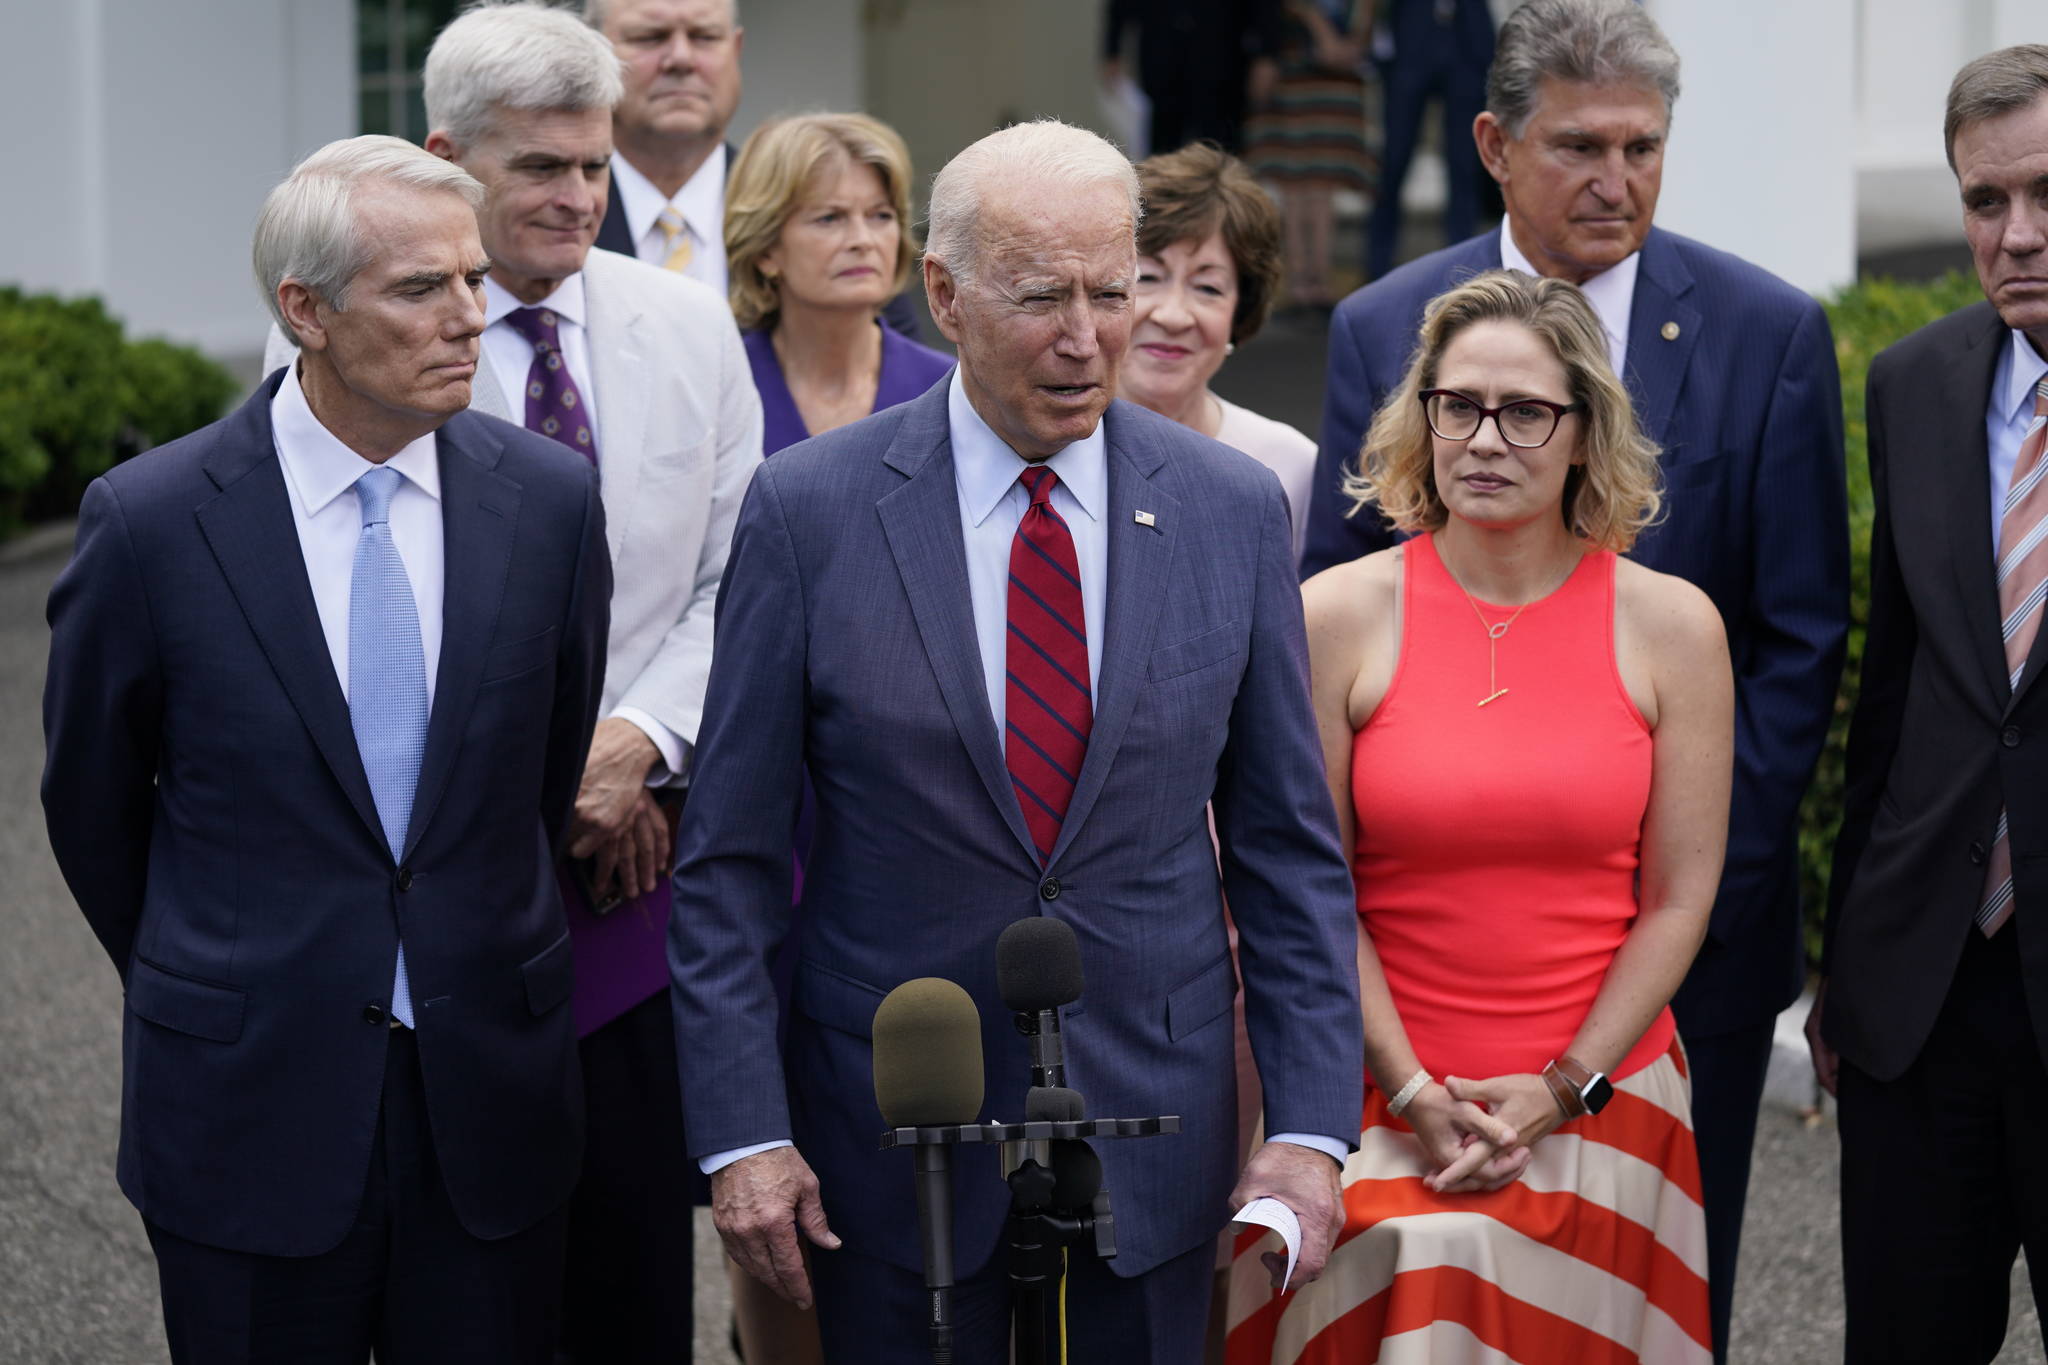 President Joe Biden, with a bipartisan group of Senators, including Alaska's Lisa Murkowski, speaks Thursday June 24, 2021, outside the White House in Washington. Biden invited members of the group of 21 Republican and Democratic senators to discuss the infrastructure plan. (AP Photo / Evan Vucci)